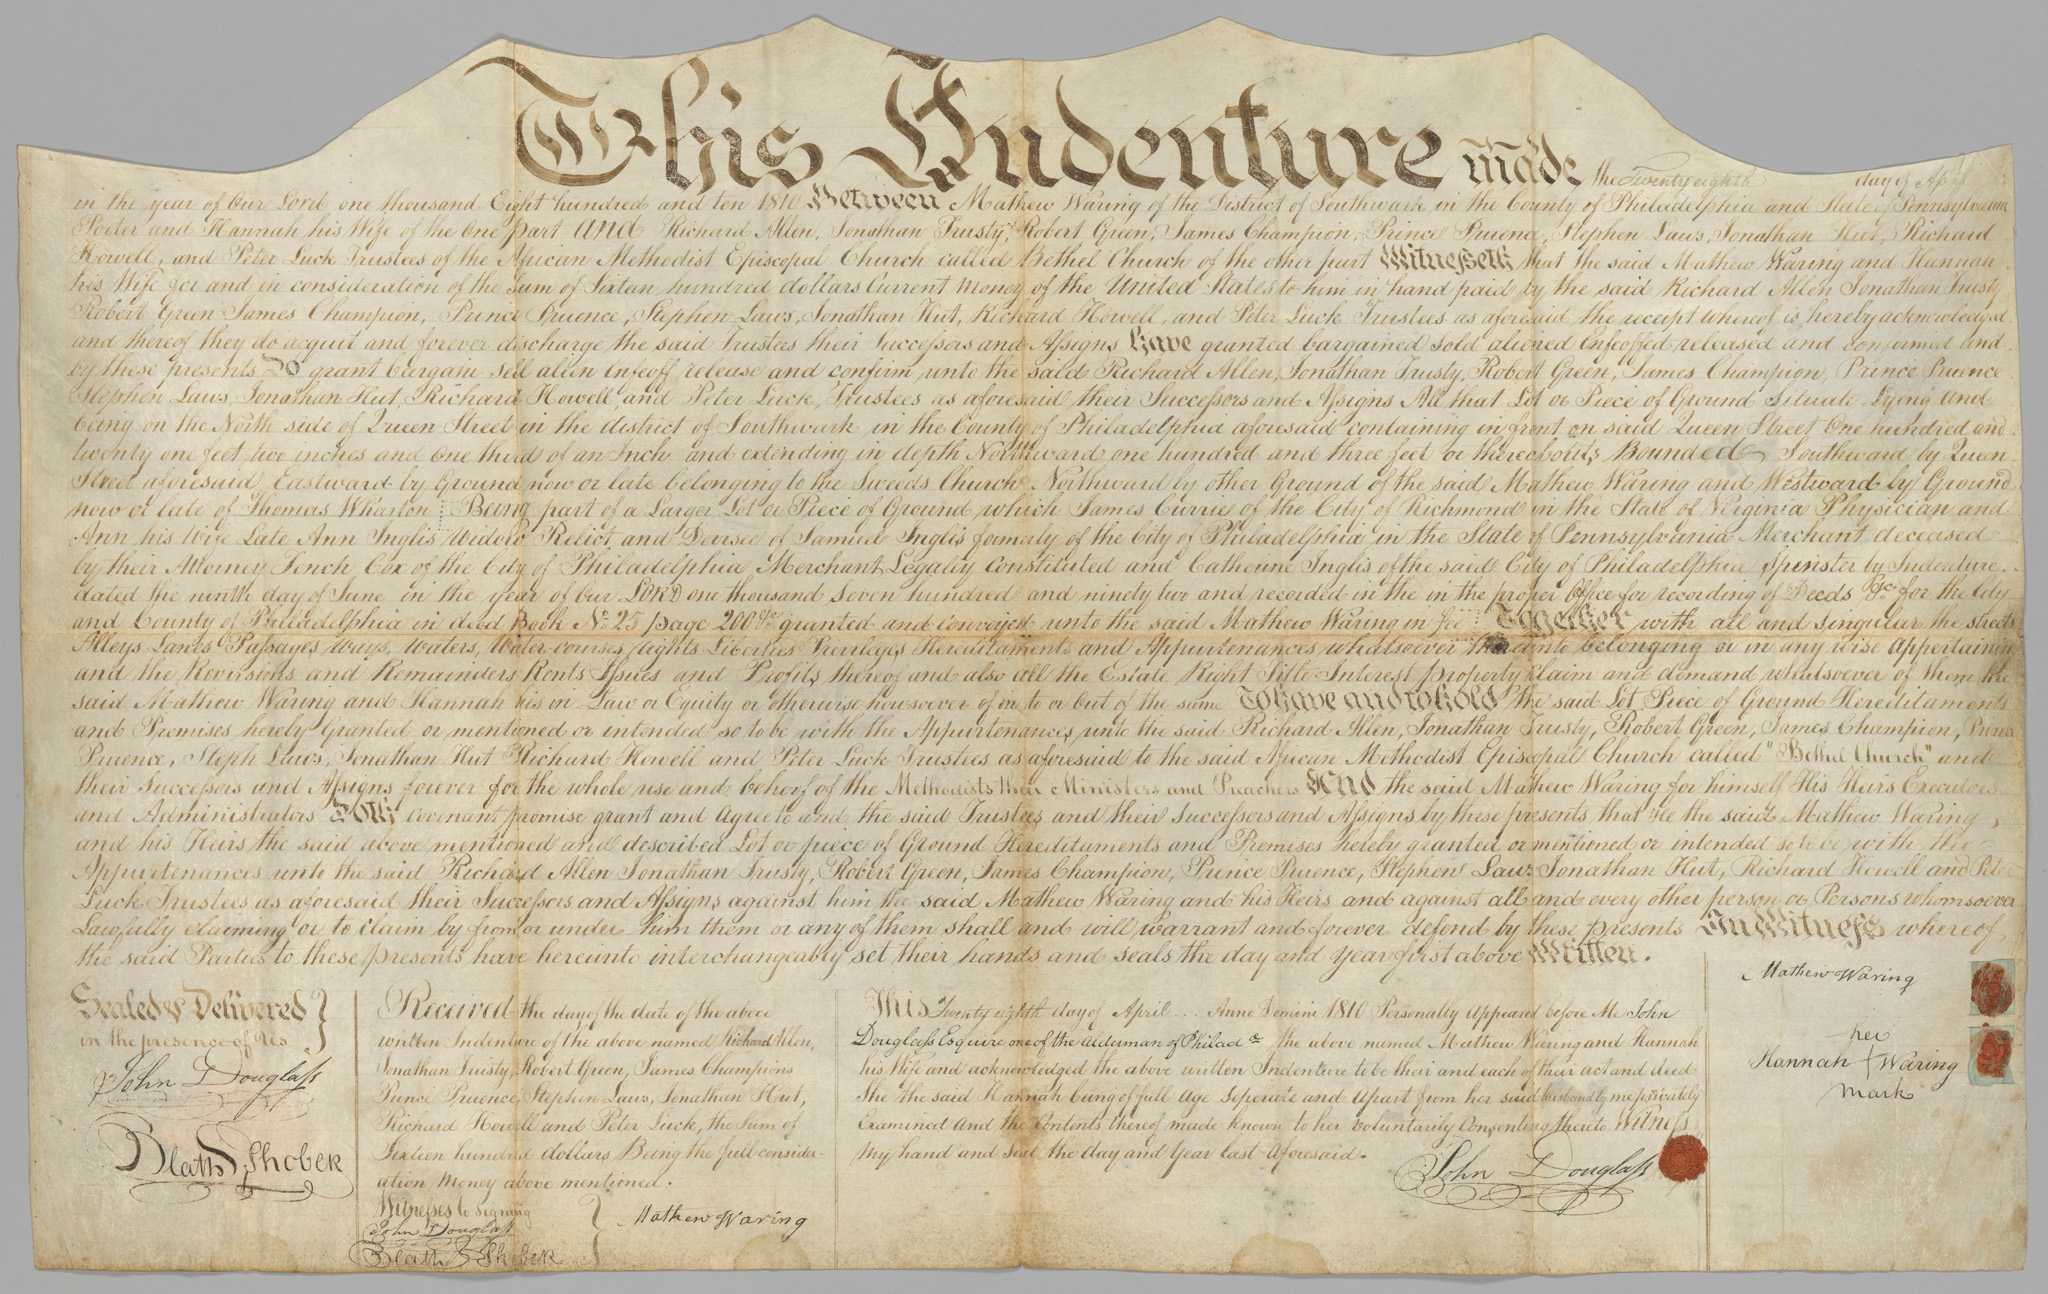 This deed for land issued to buyers is a yellowed paper document with visible creasing. There is inverted scalloping along the top edge, and begins [This Indenture] in large script at the top. The document is issued to Richard Allen, Jonathan Trusty, Robert Green, James Champion, Prince Pruence, Stephen Laws, Jonathan Hut, Richard Howell, and Peter Luck trustees of the African Methodist Episcopal Church called Bethel Church by Mathew and Hannah Waring, as witnessed by John Douglass and Blath Shobel.